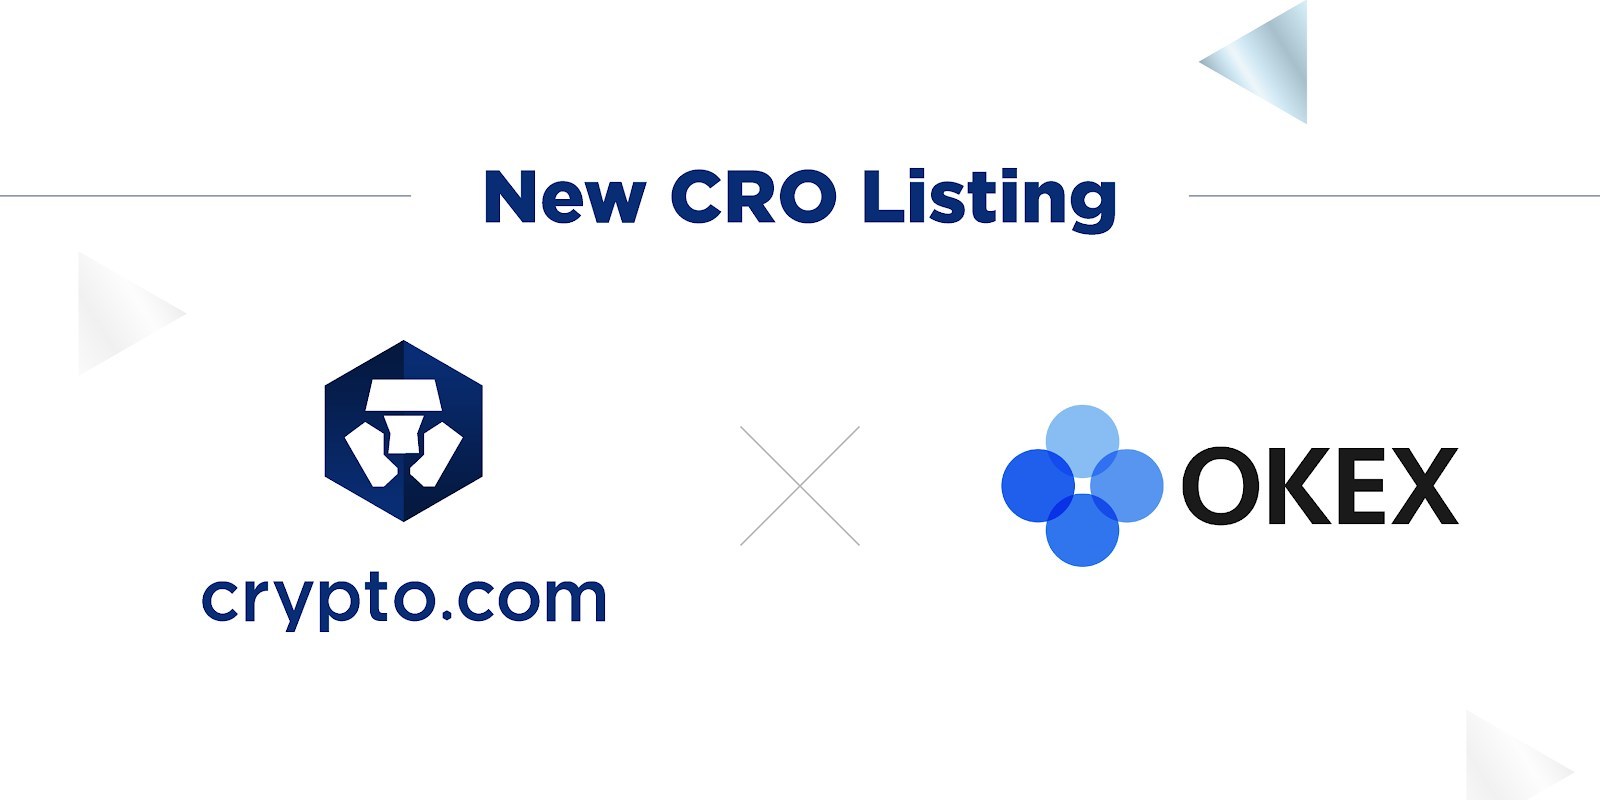 Crypto.com Chain Token (CRO) to be Listed on OKEx